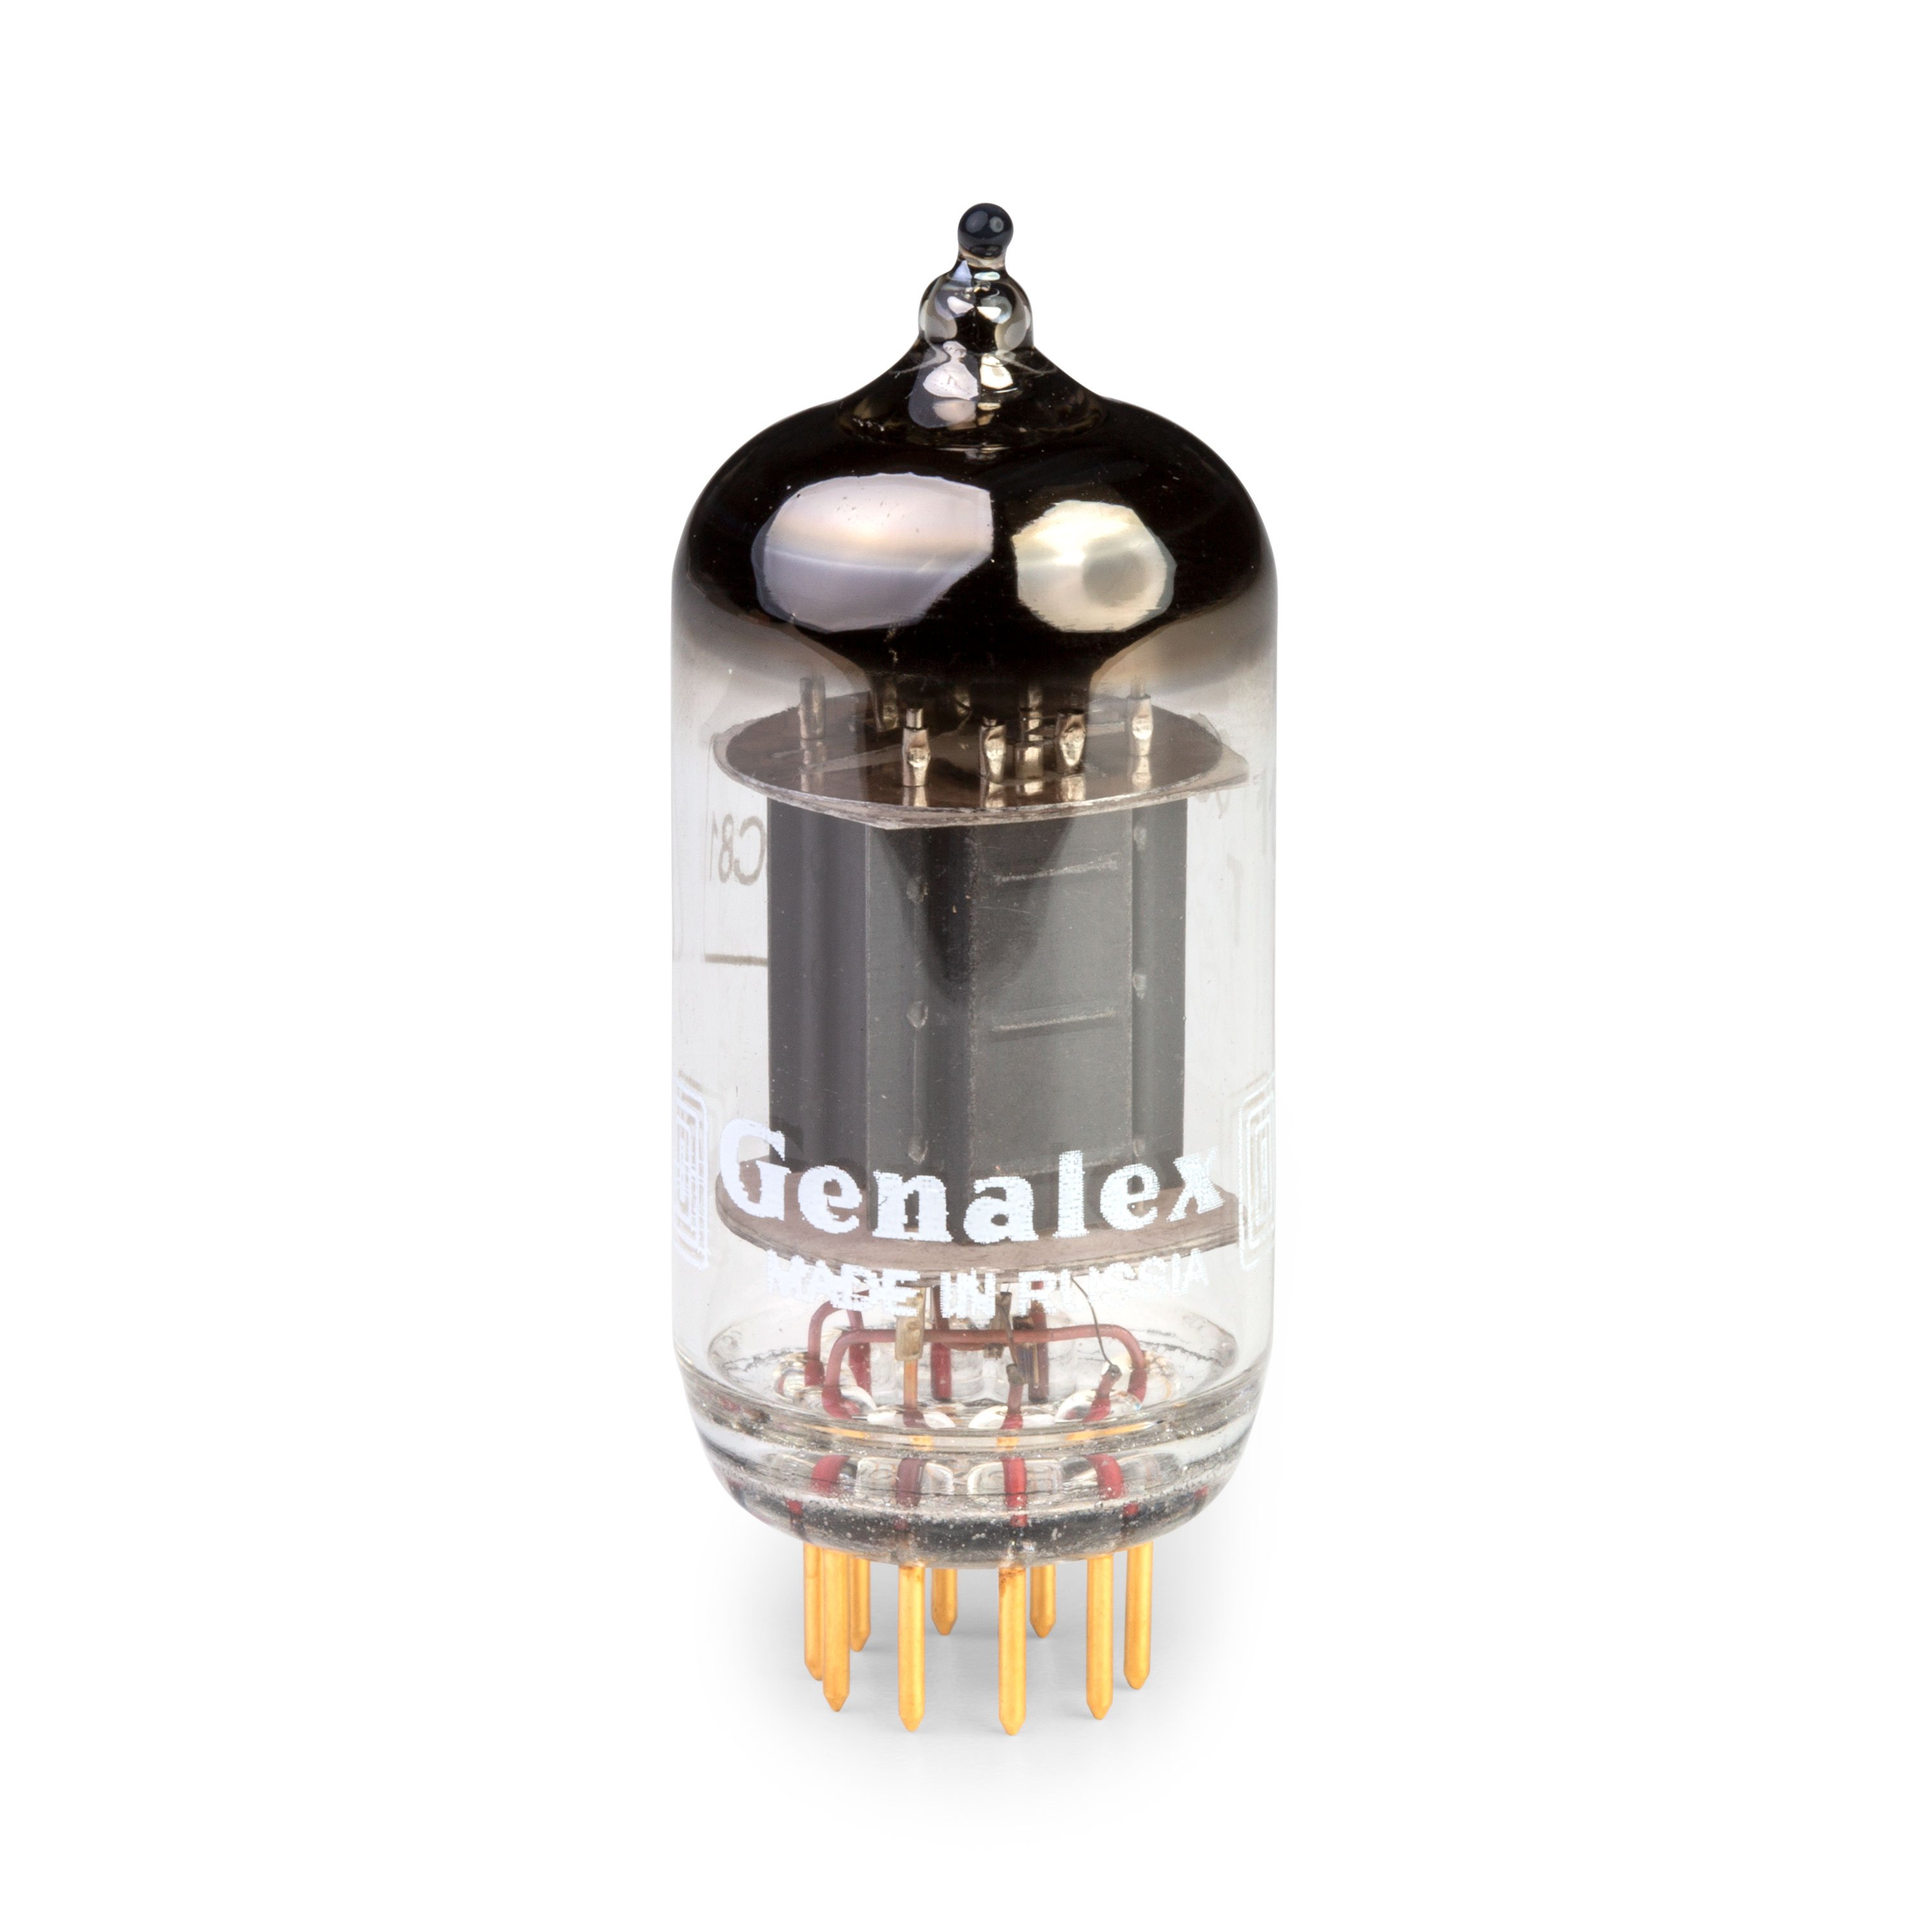 Genalex Gold Lion 12AT7 Preamp Tube